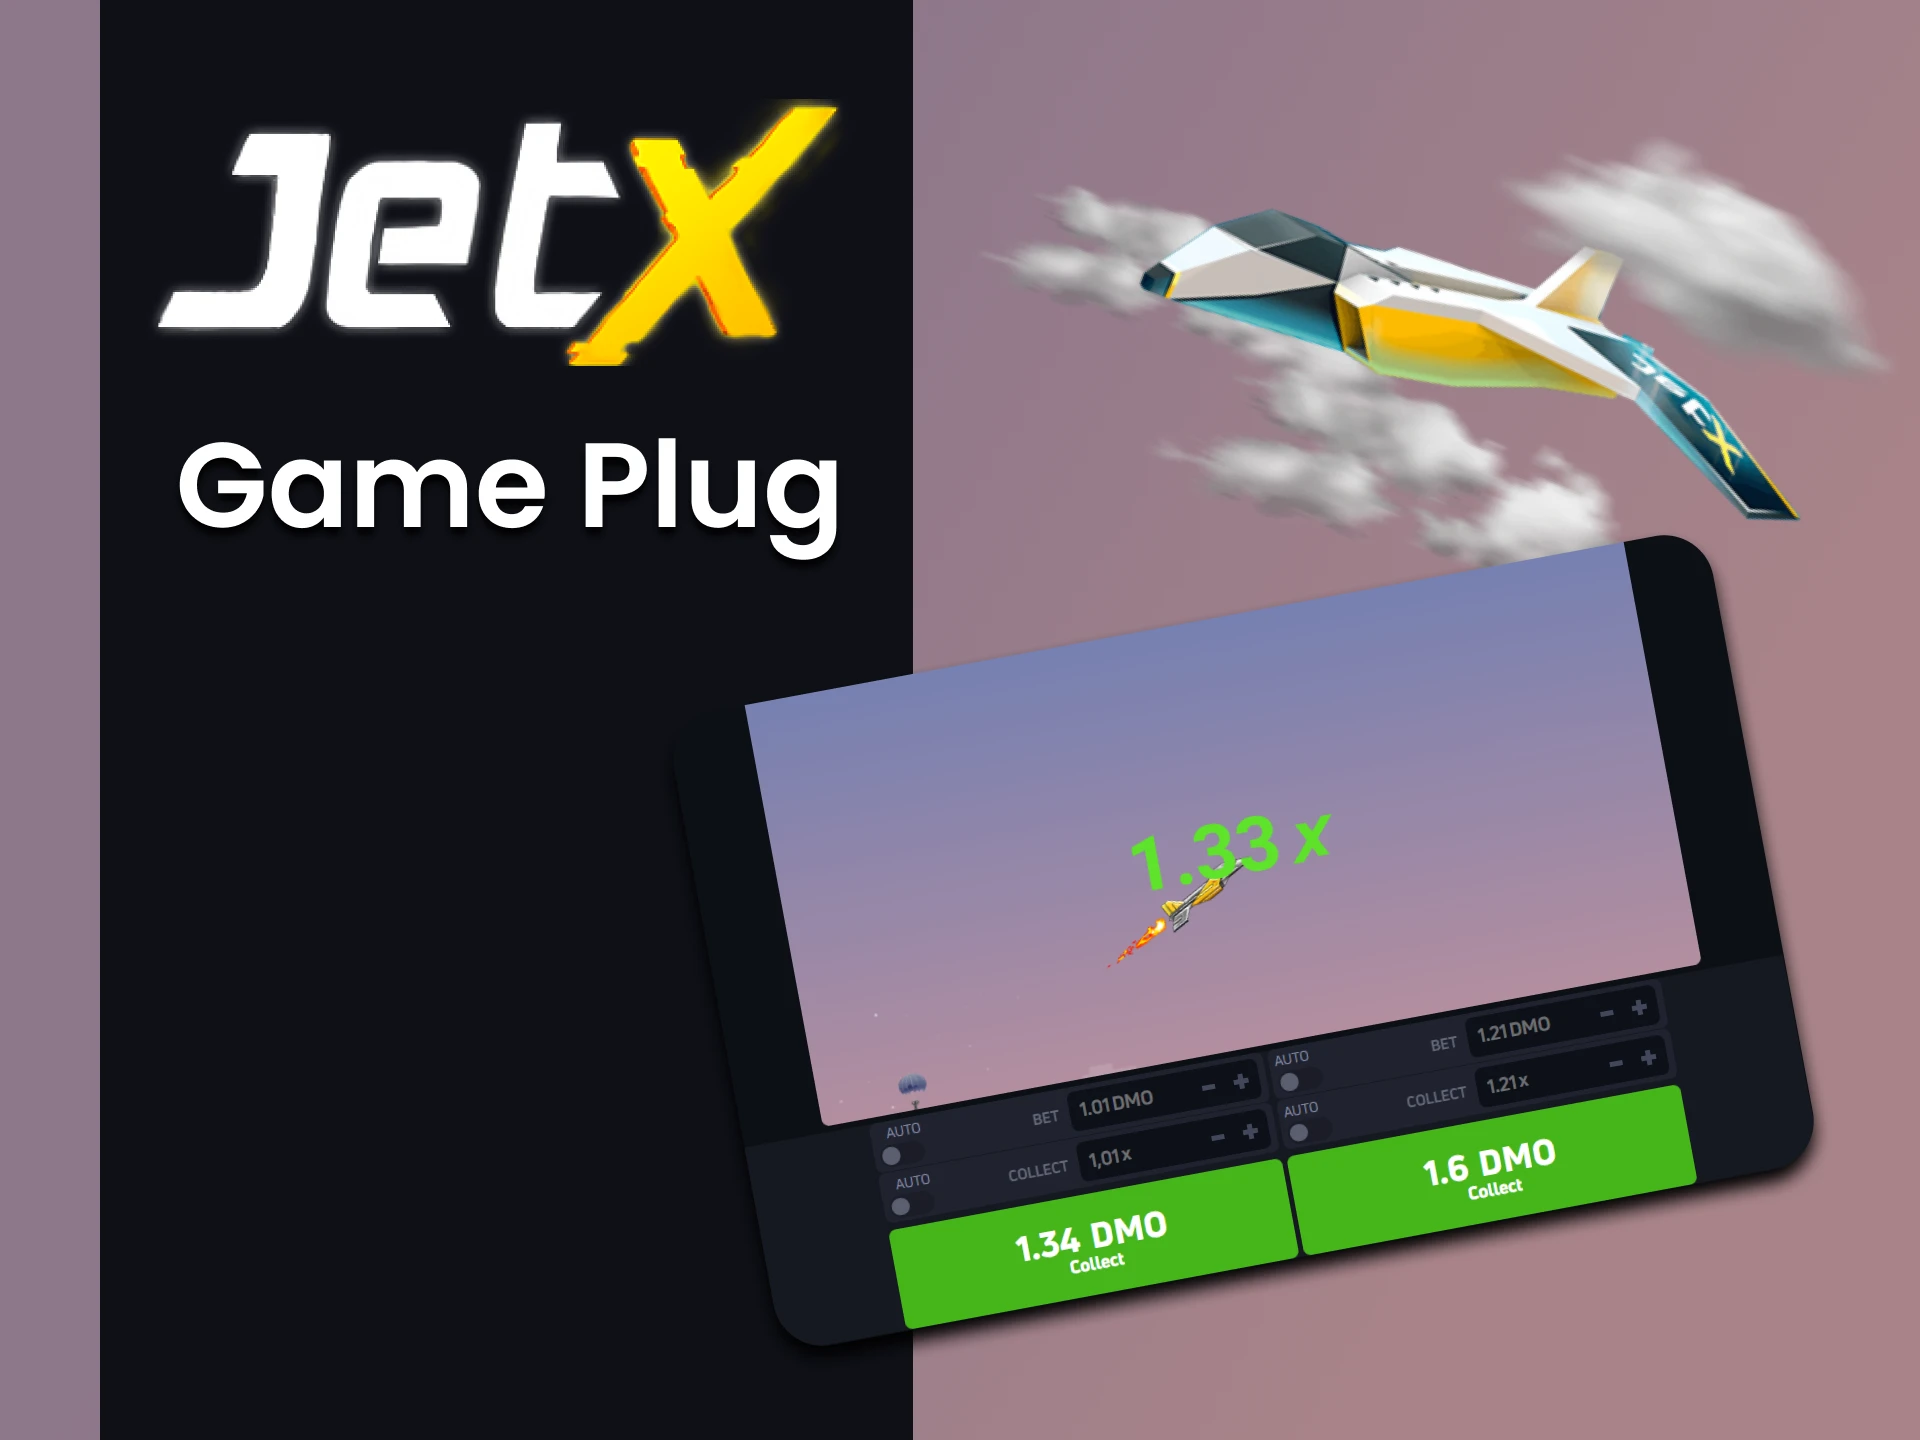 Having studied the Game Plug strategy, you will definitely win in JetX.